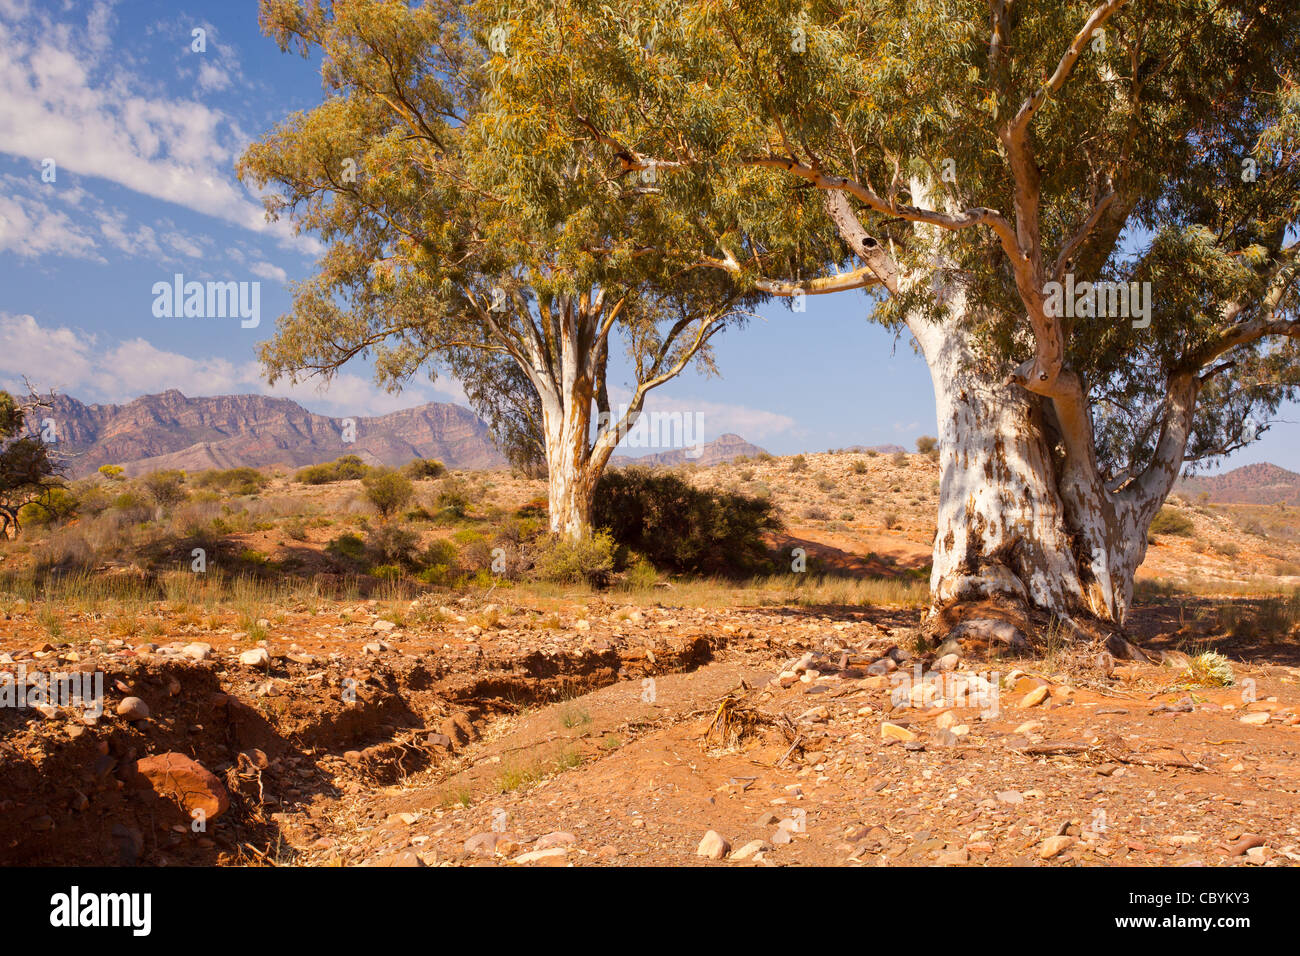 Old River Red Gum (Eucalyptus camaldulensis) trees in dry Moralana Creek on the Moralana Scenic Drive in the Flinders Ranges, outback South Australia Stock Photo